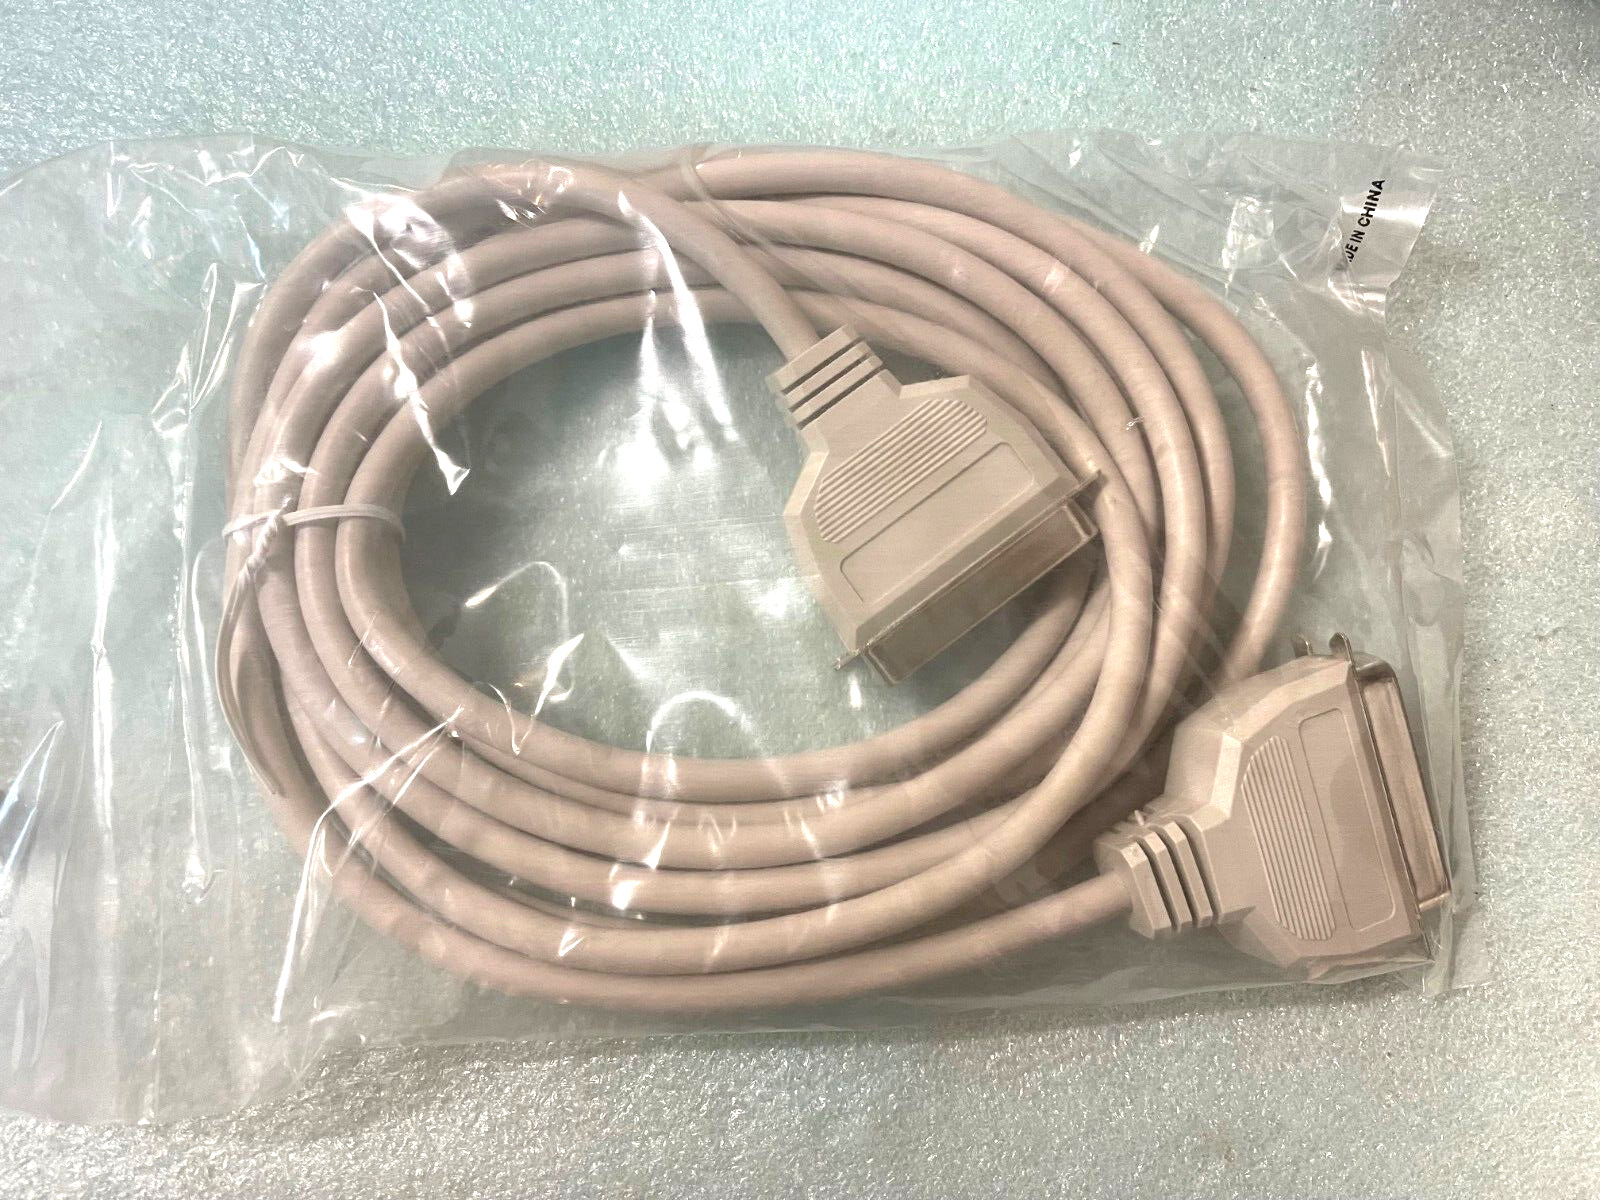 BRAND NEW 14 FEET 36 PIN CENTRONIC MALE TO 36 PIN CENTRONIC MALE CABLE RM3-BIN9